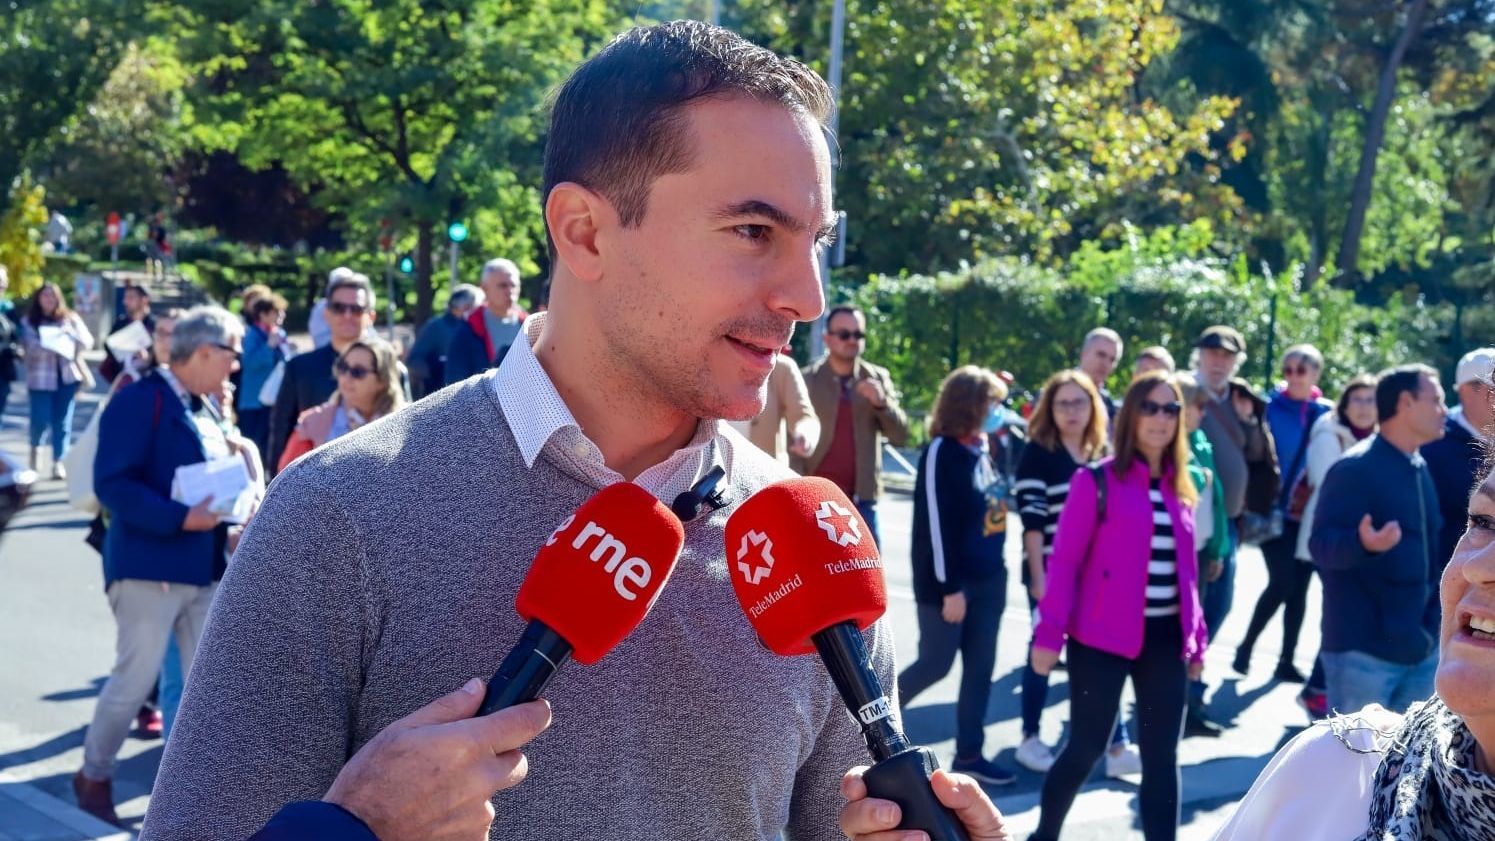 Lobato confirms that the PSOE candidate in Madrid will be a woman: “We are going to have a great mayor”